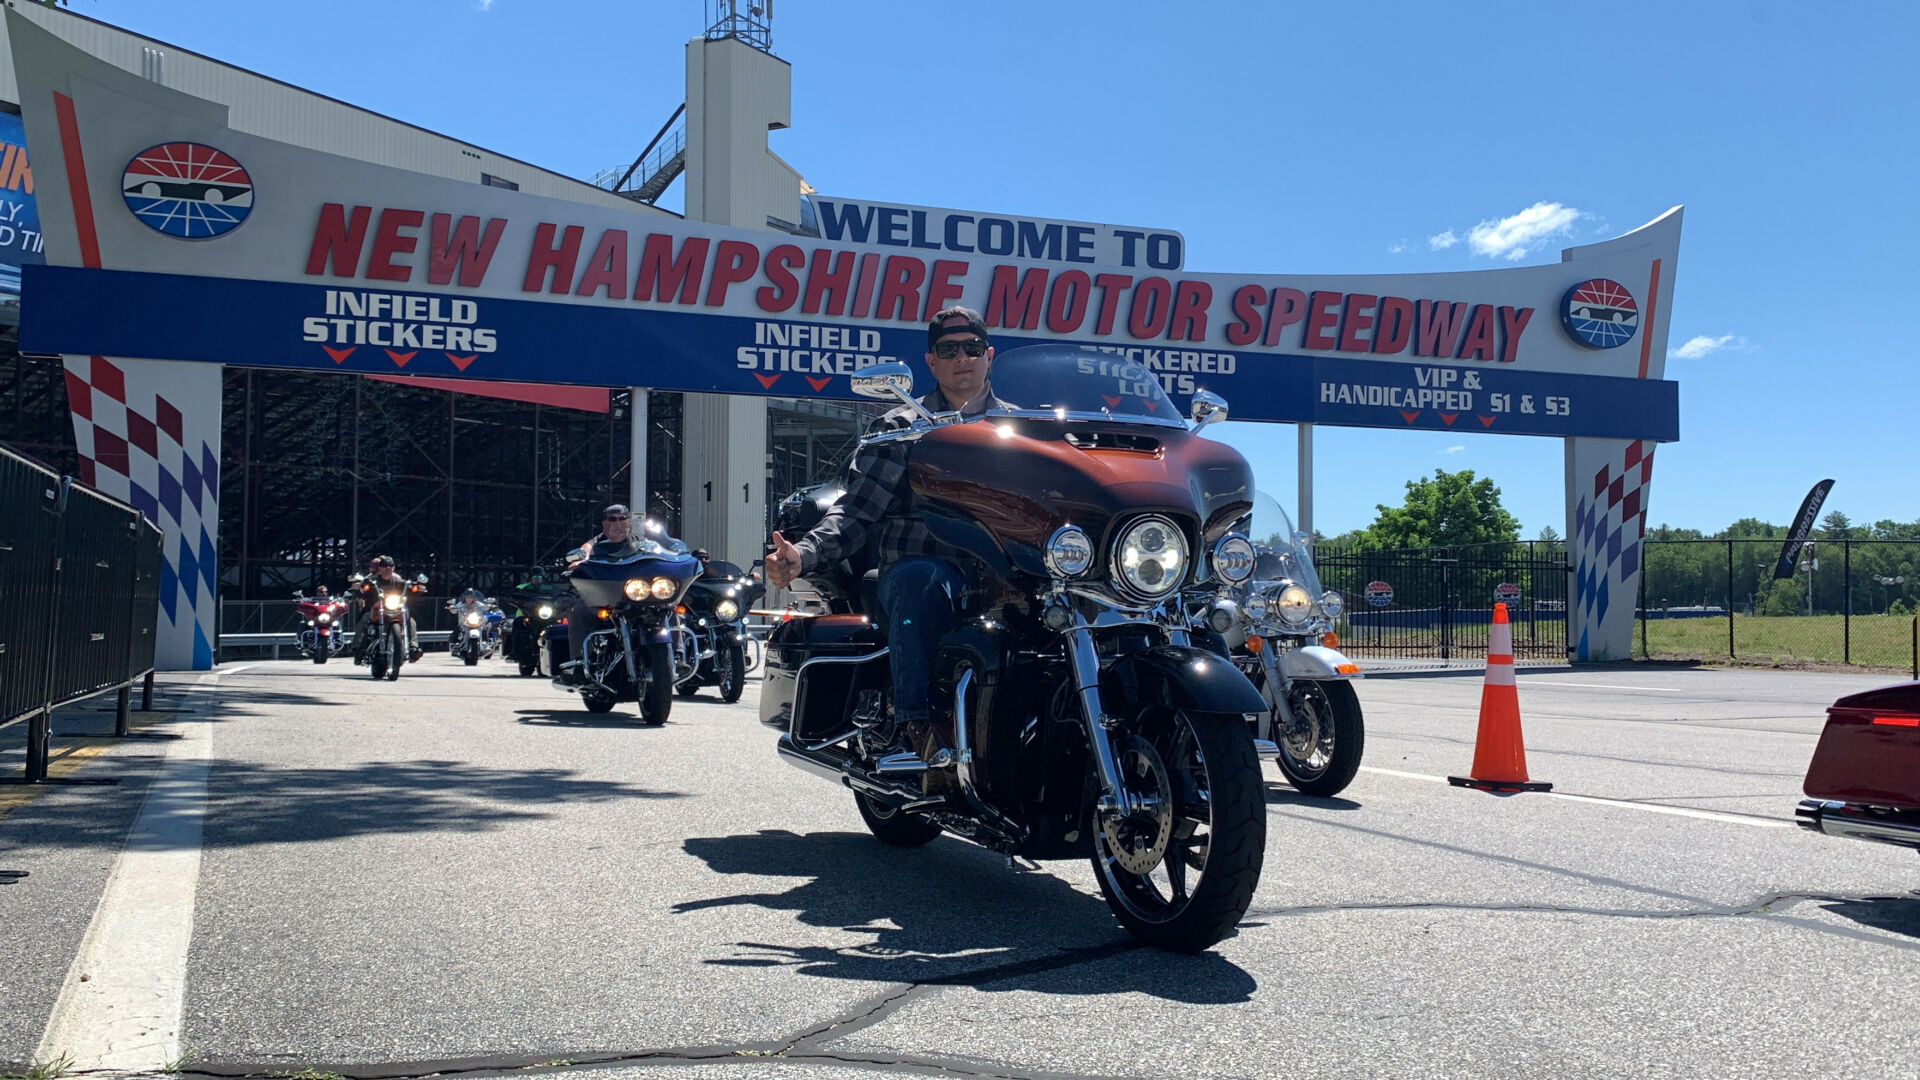 Thousands of motorcycle riders from all over the country will descend upon New Hampshire Motor Speedway in Loudon, N.H. during the 100th Annual Laconia Motorcycle Week Rally June 10-18. Photo by Shannon Stephens, courtesy NHMS.